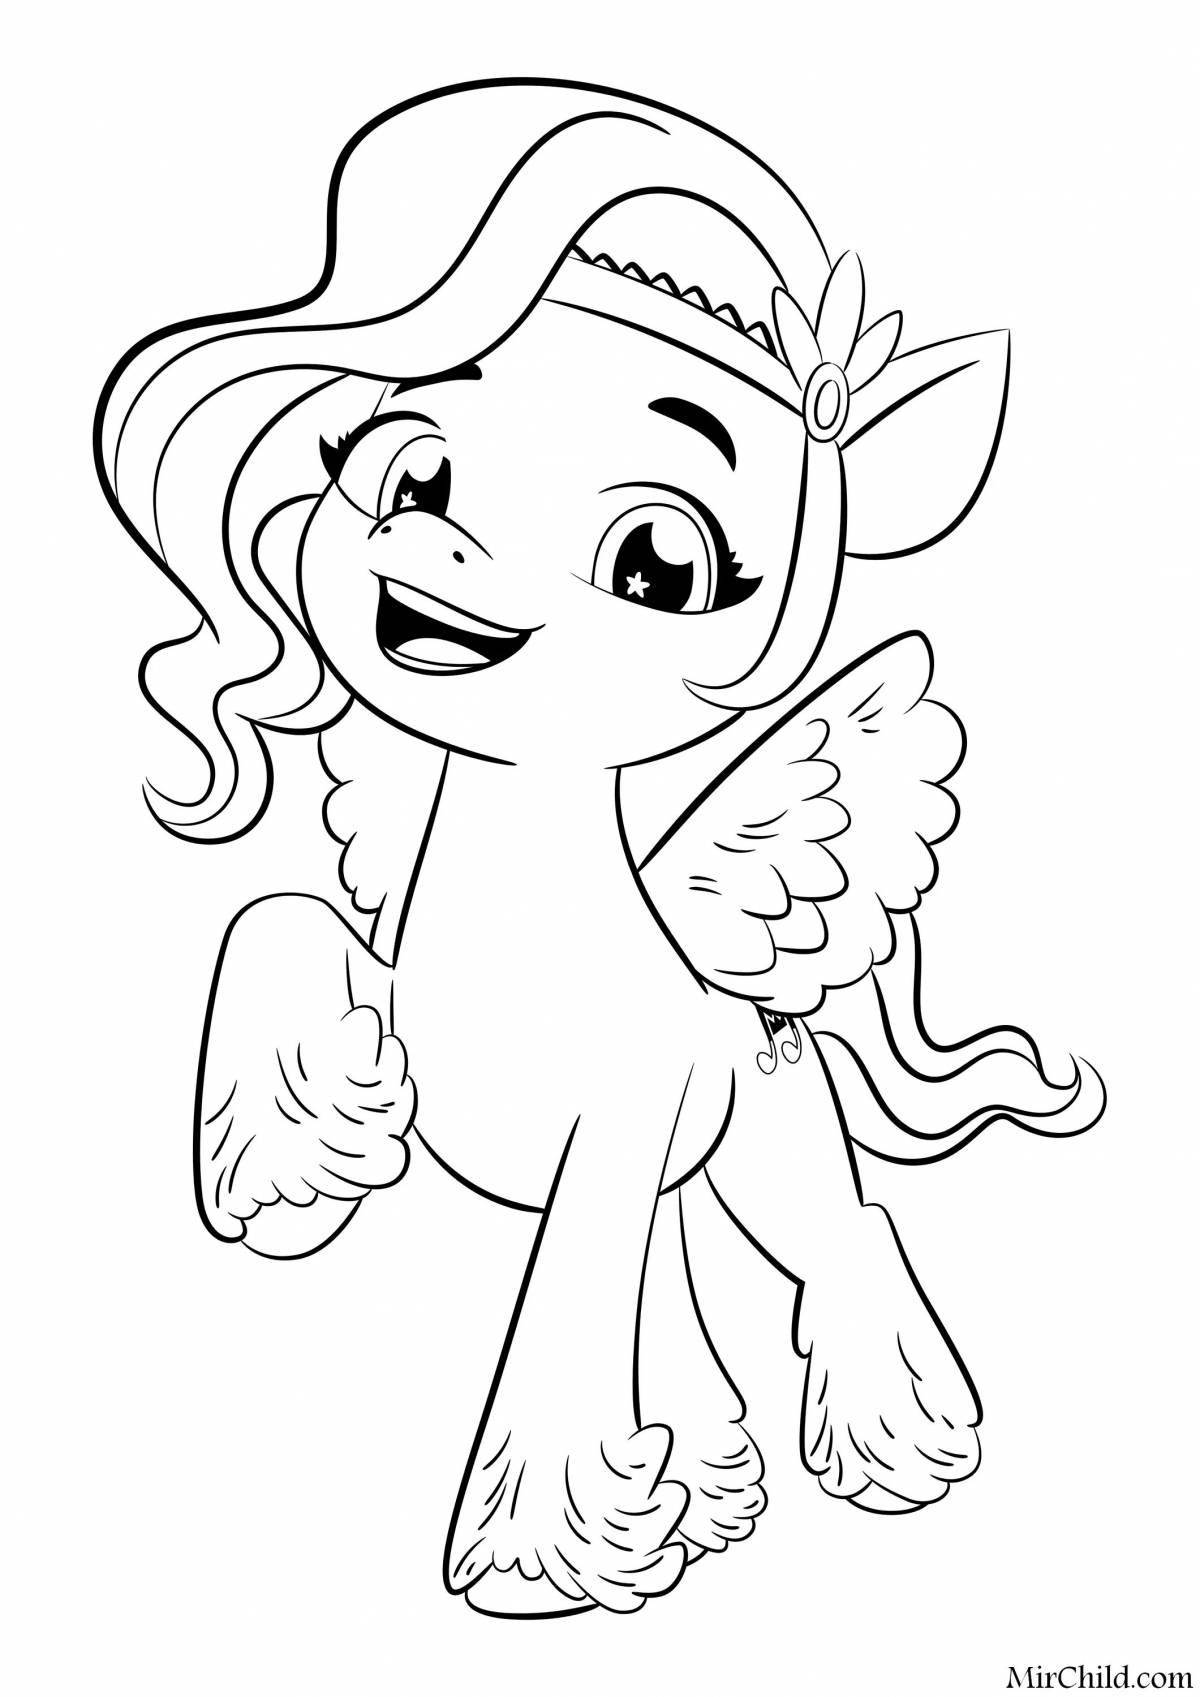 Glorious pony sunny coloring